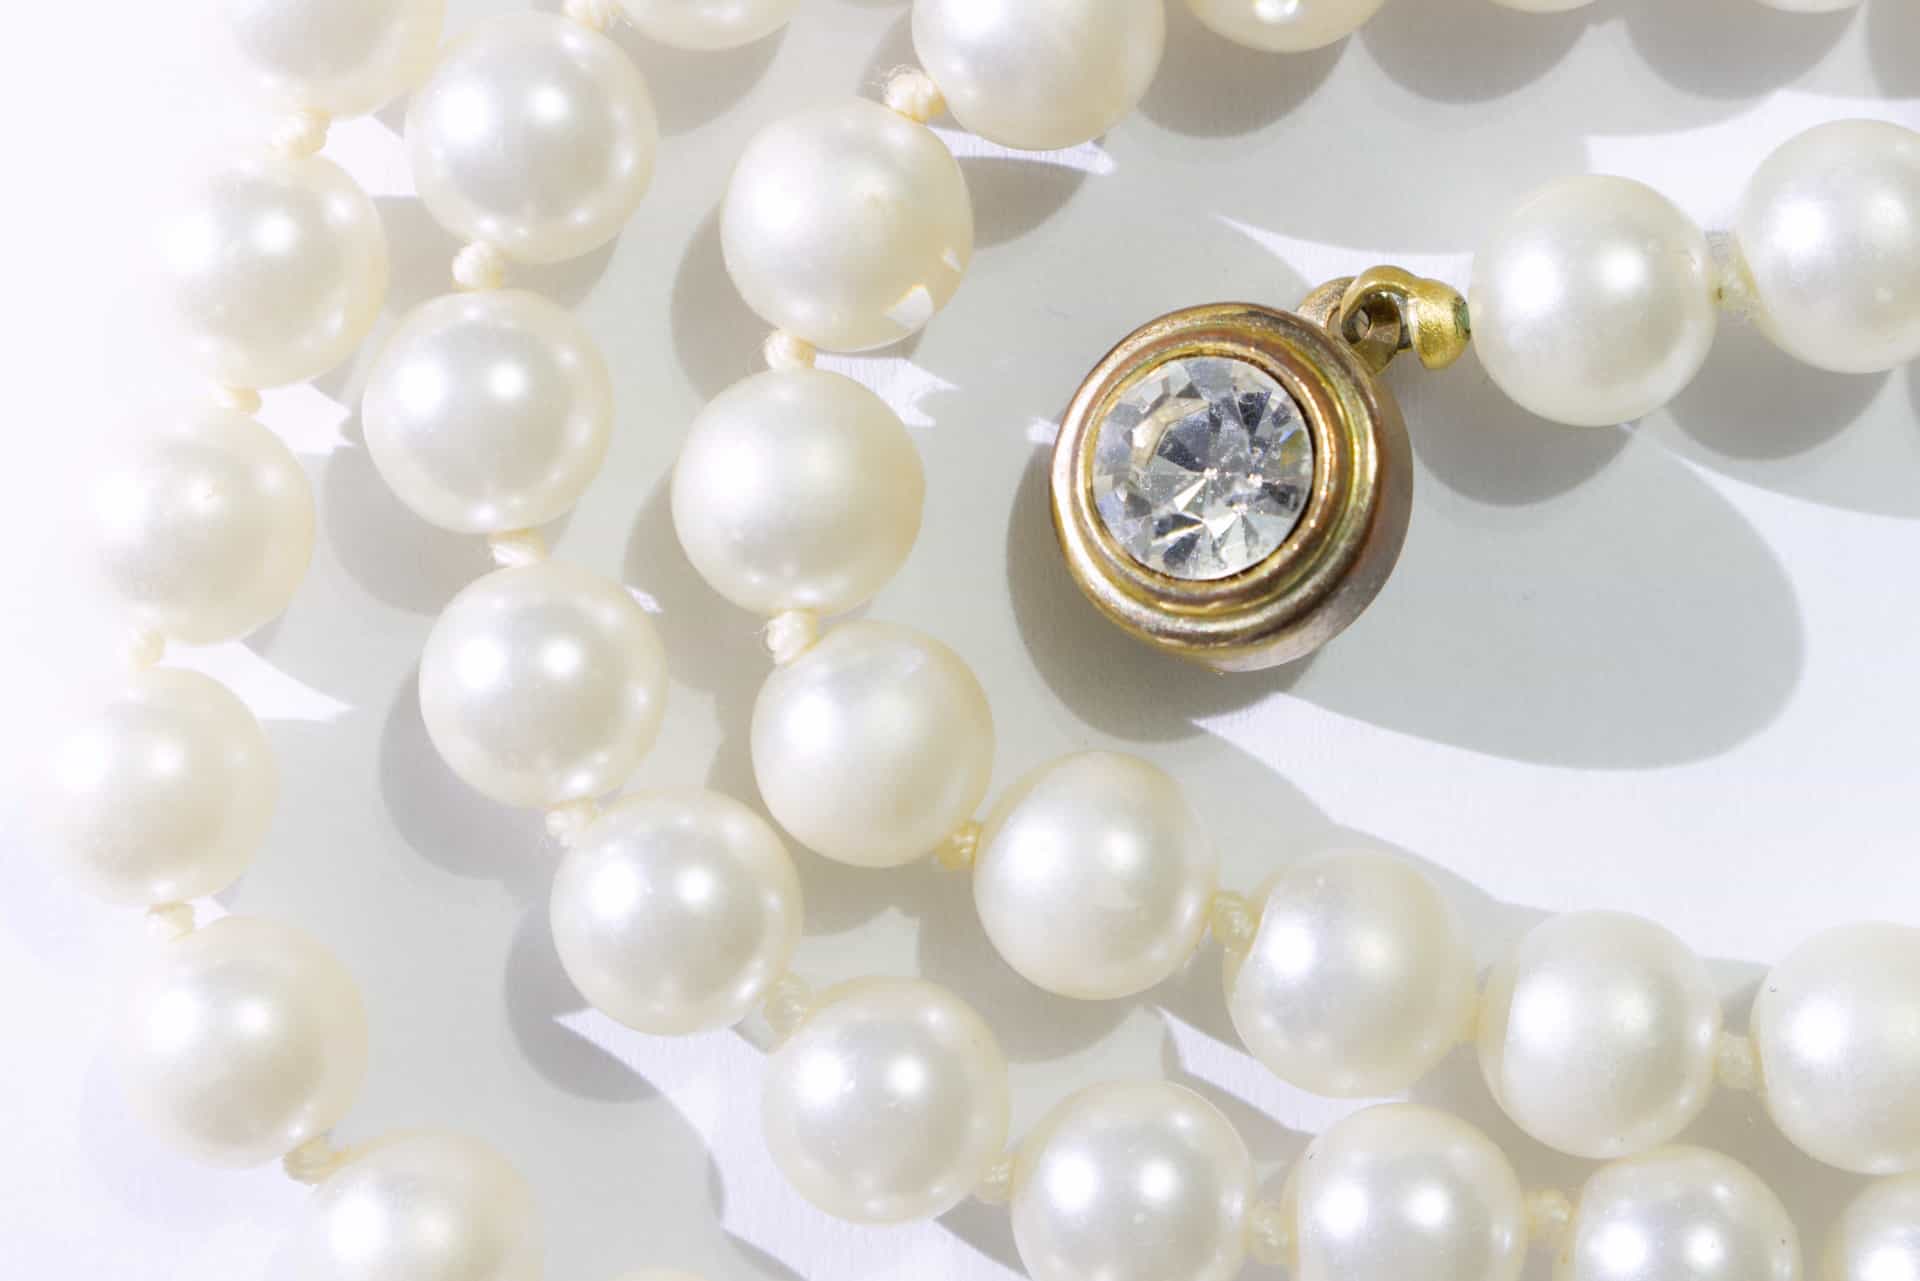 Pearl necklace and diamond charm